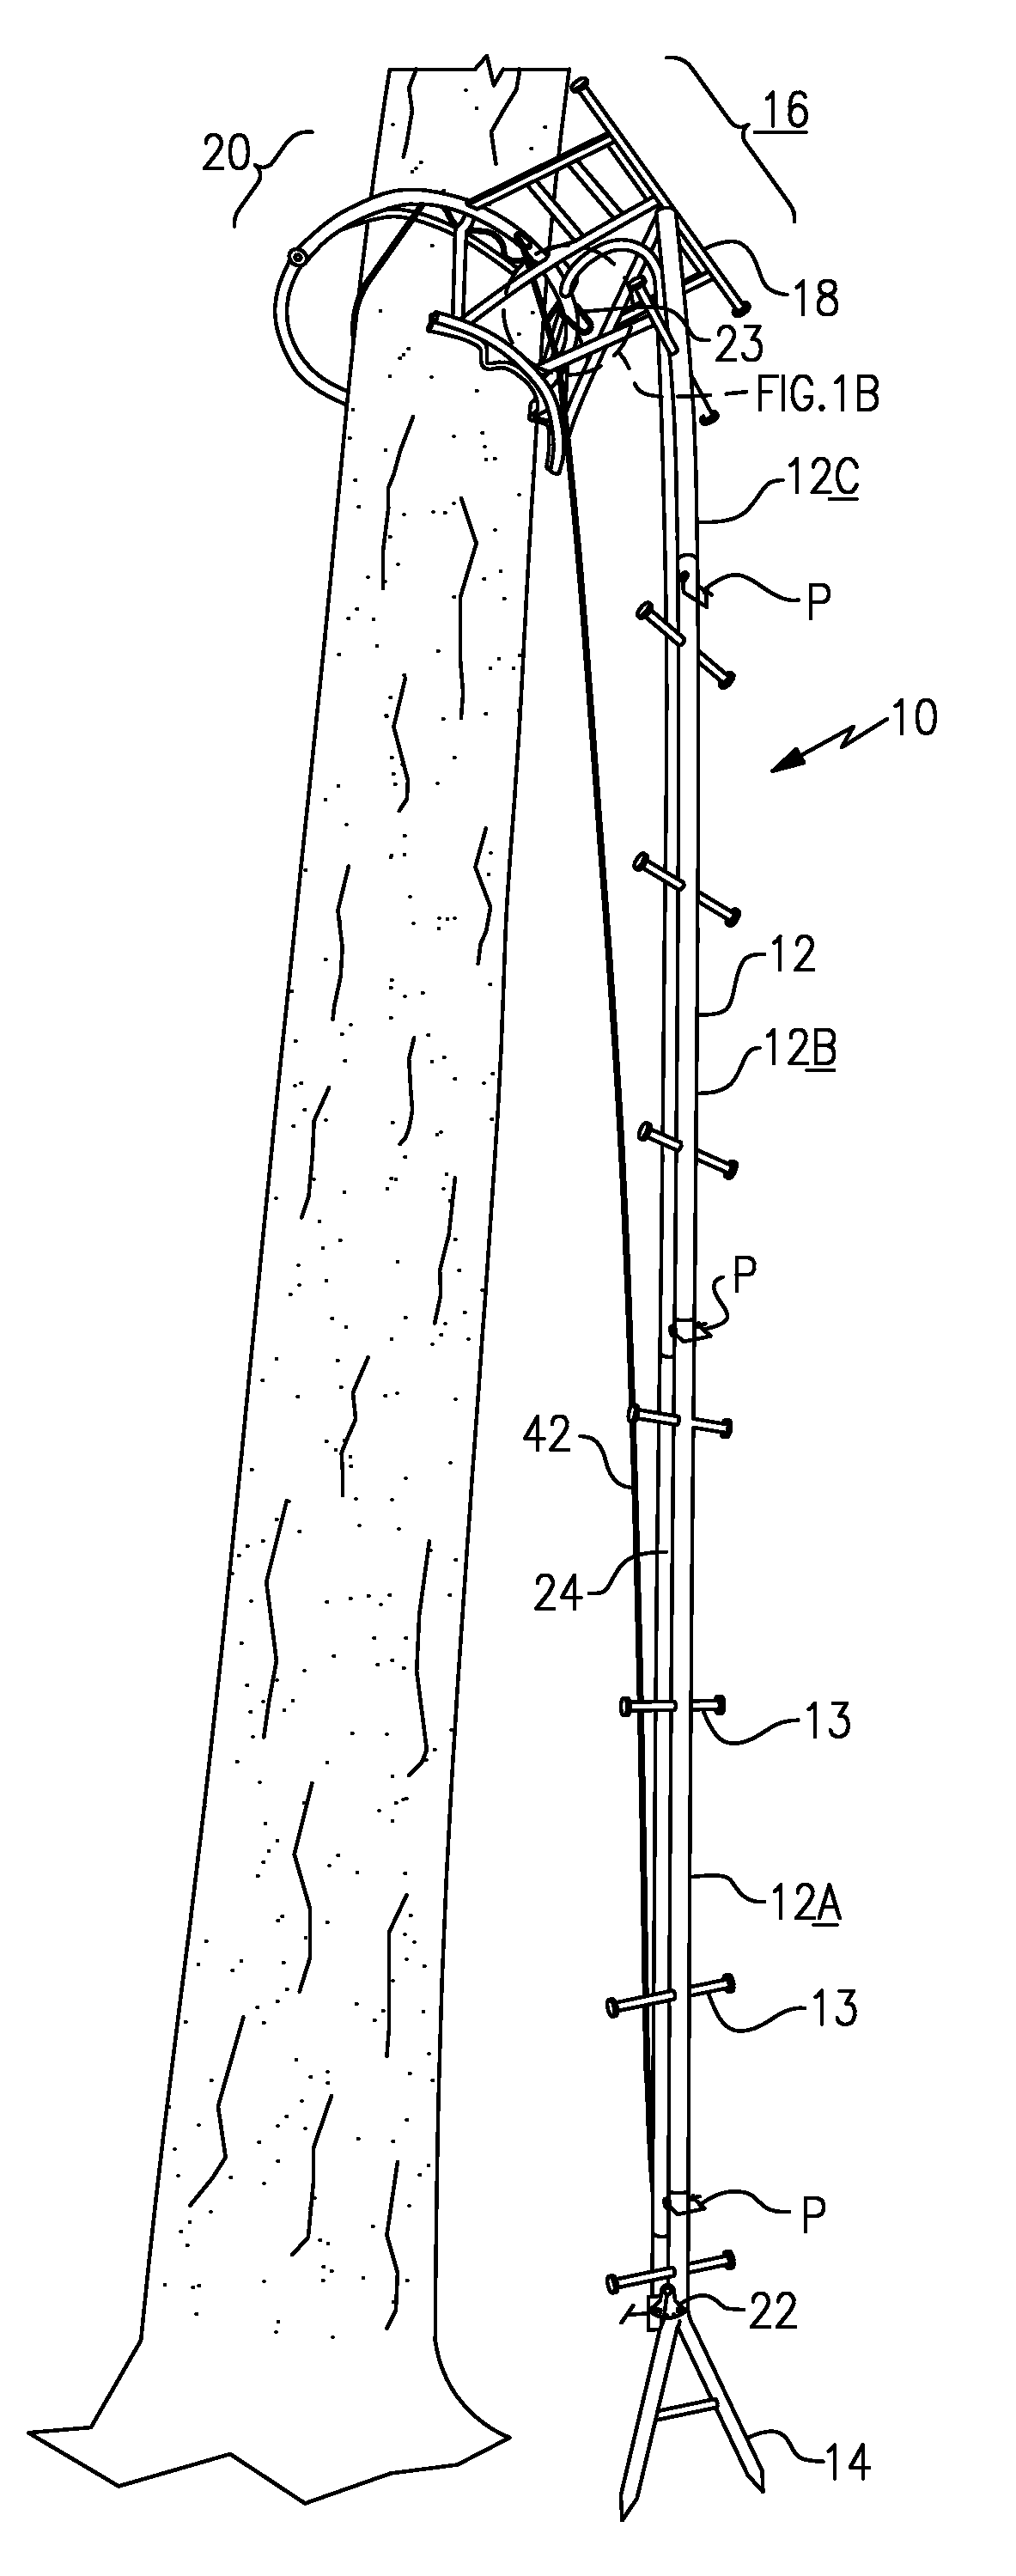 Suspended Anchored Climbing Device with Safety Features